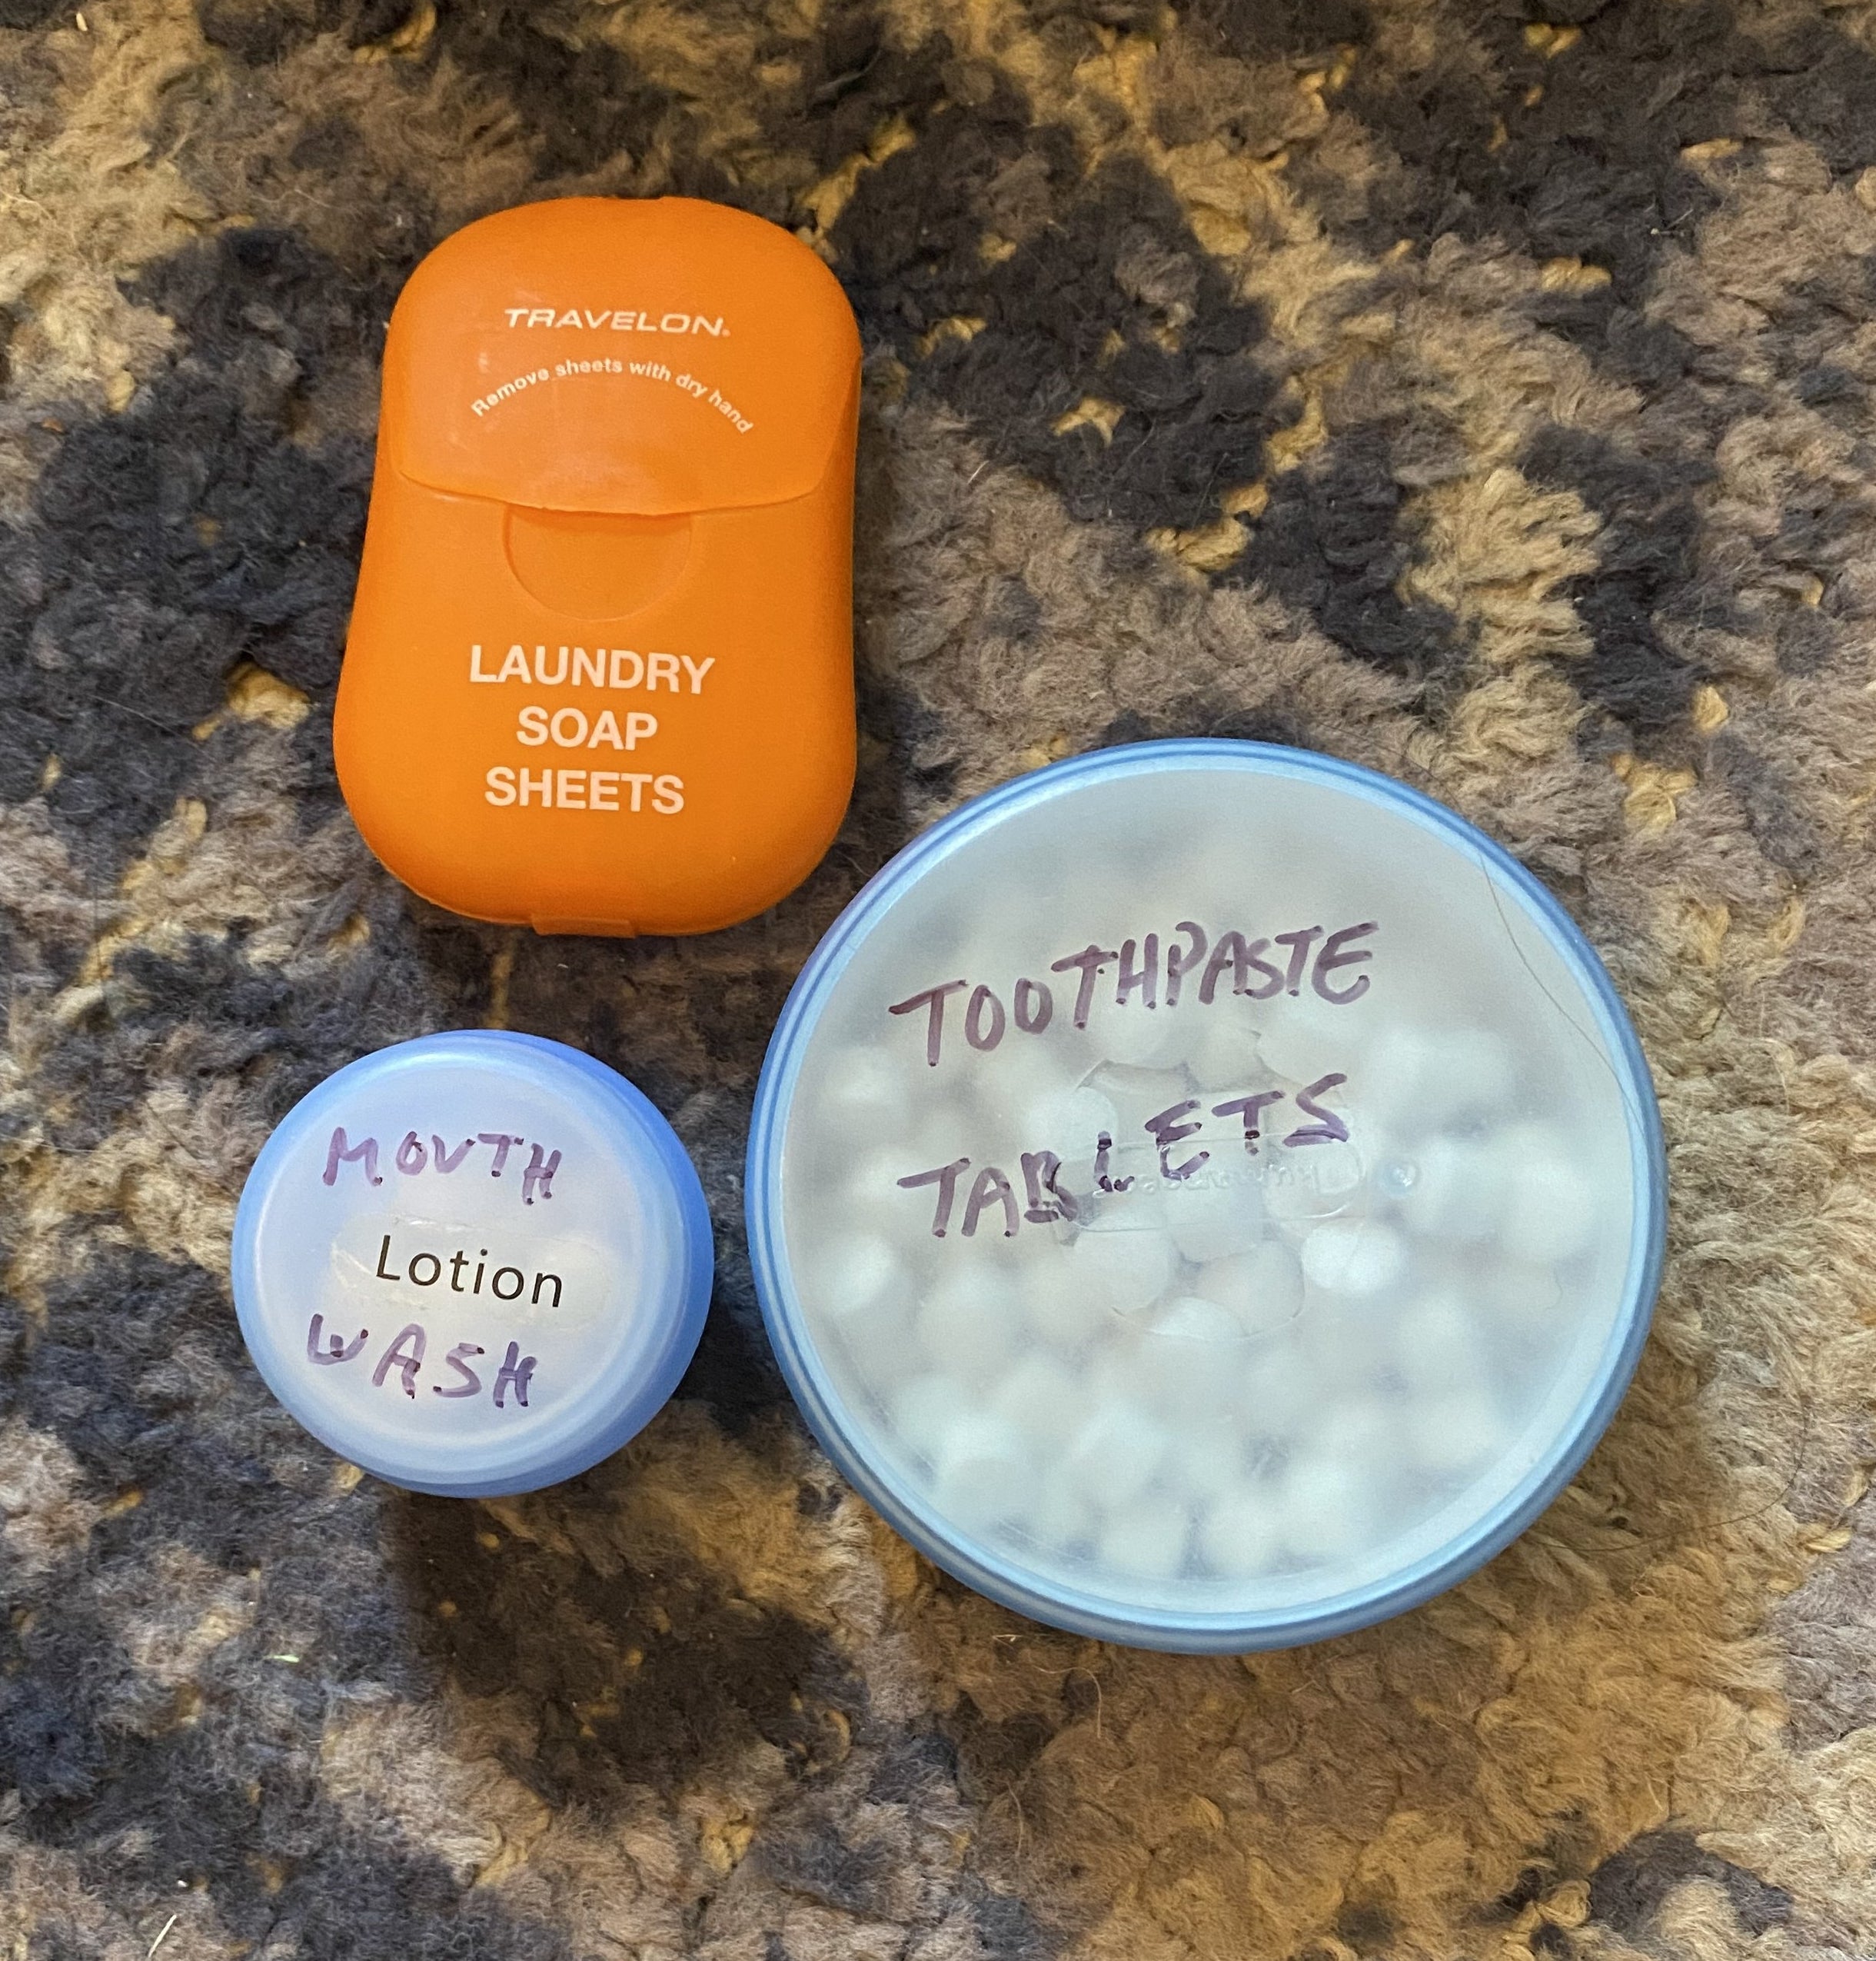 packet of laundry sheets, containers of mouthwash and toothpaste tablets